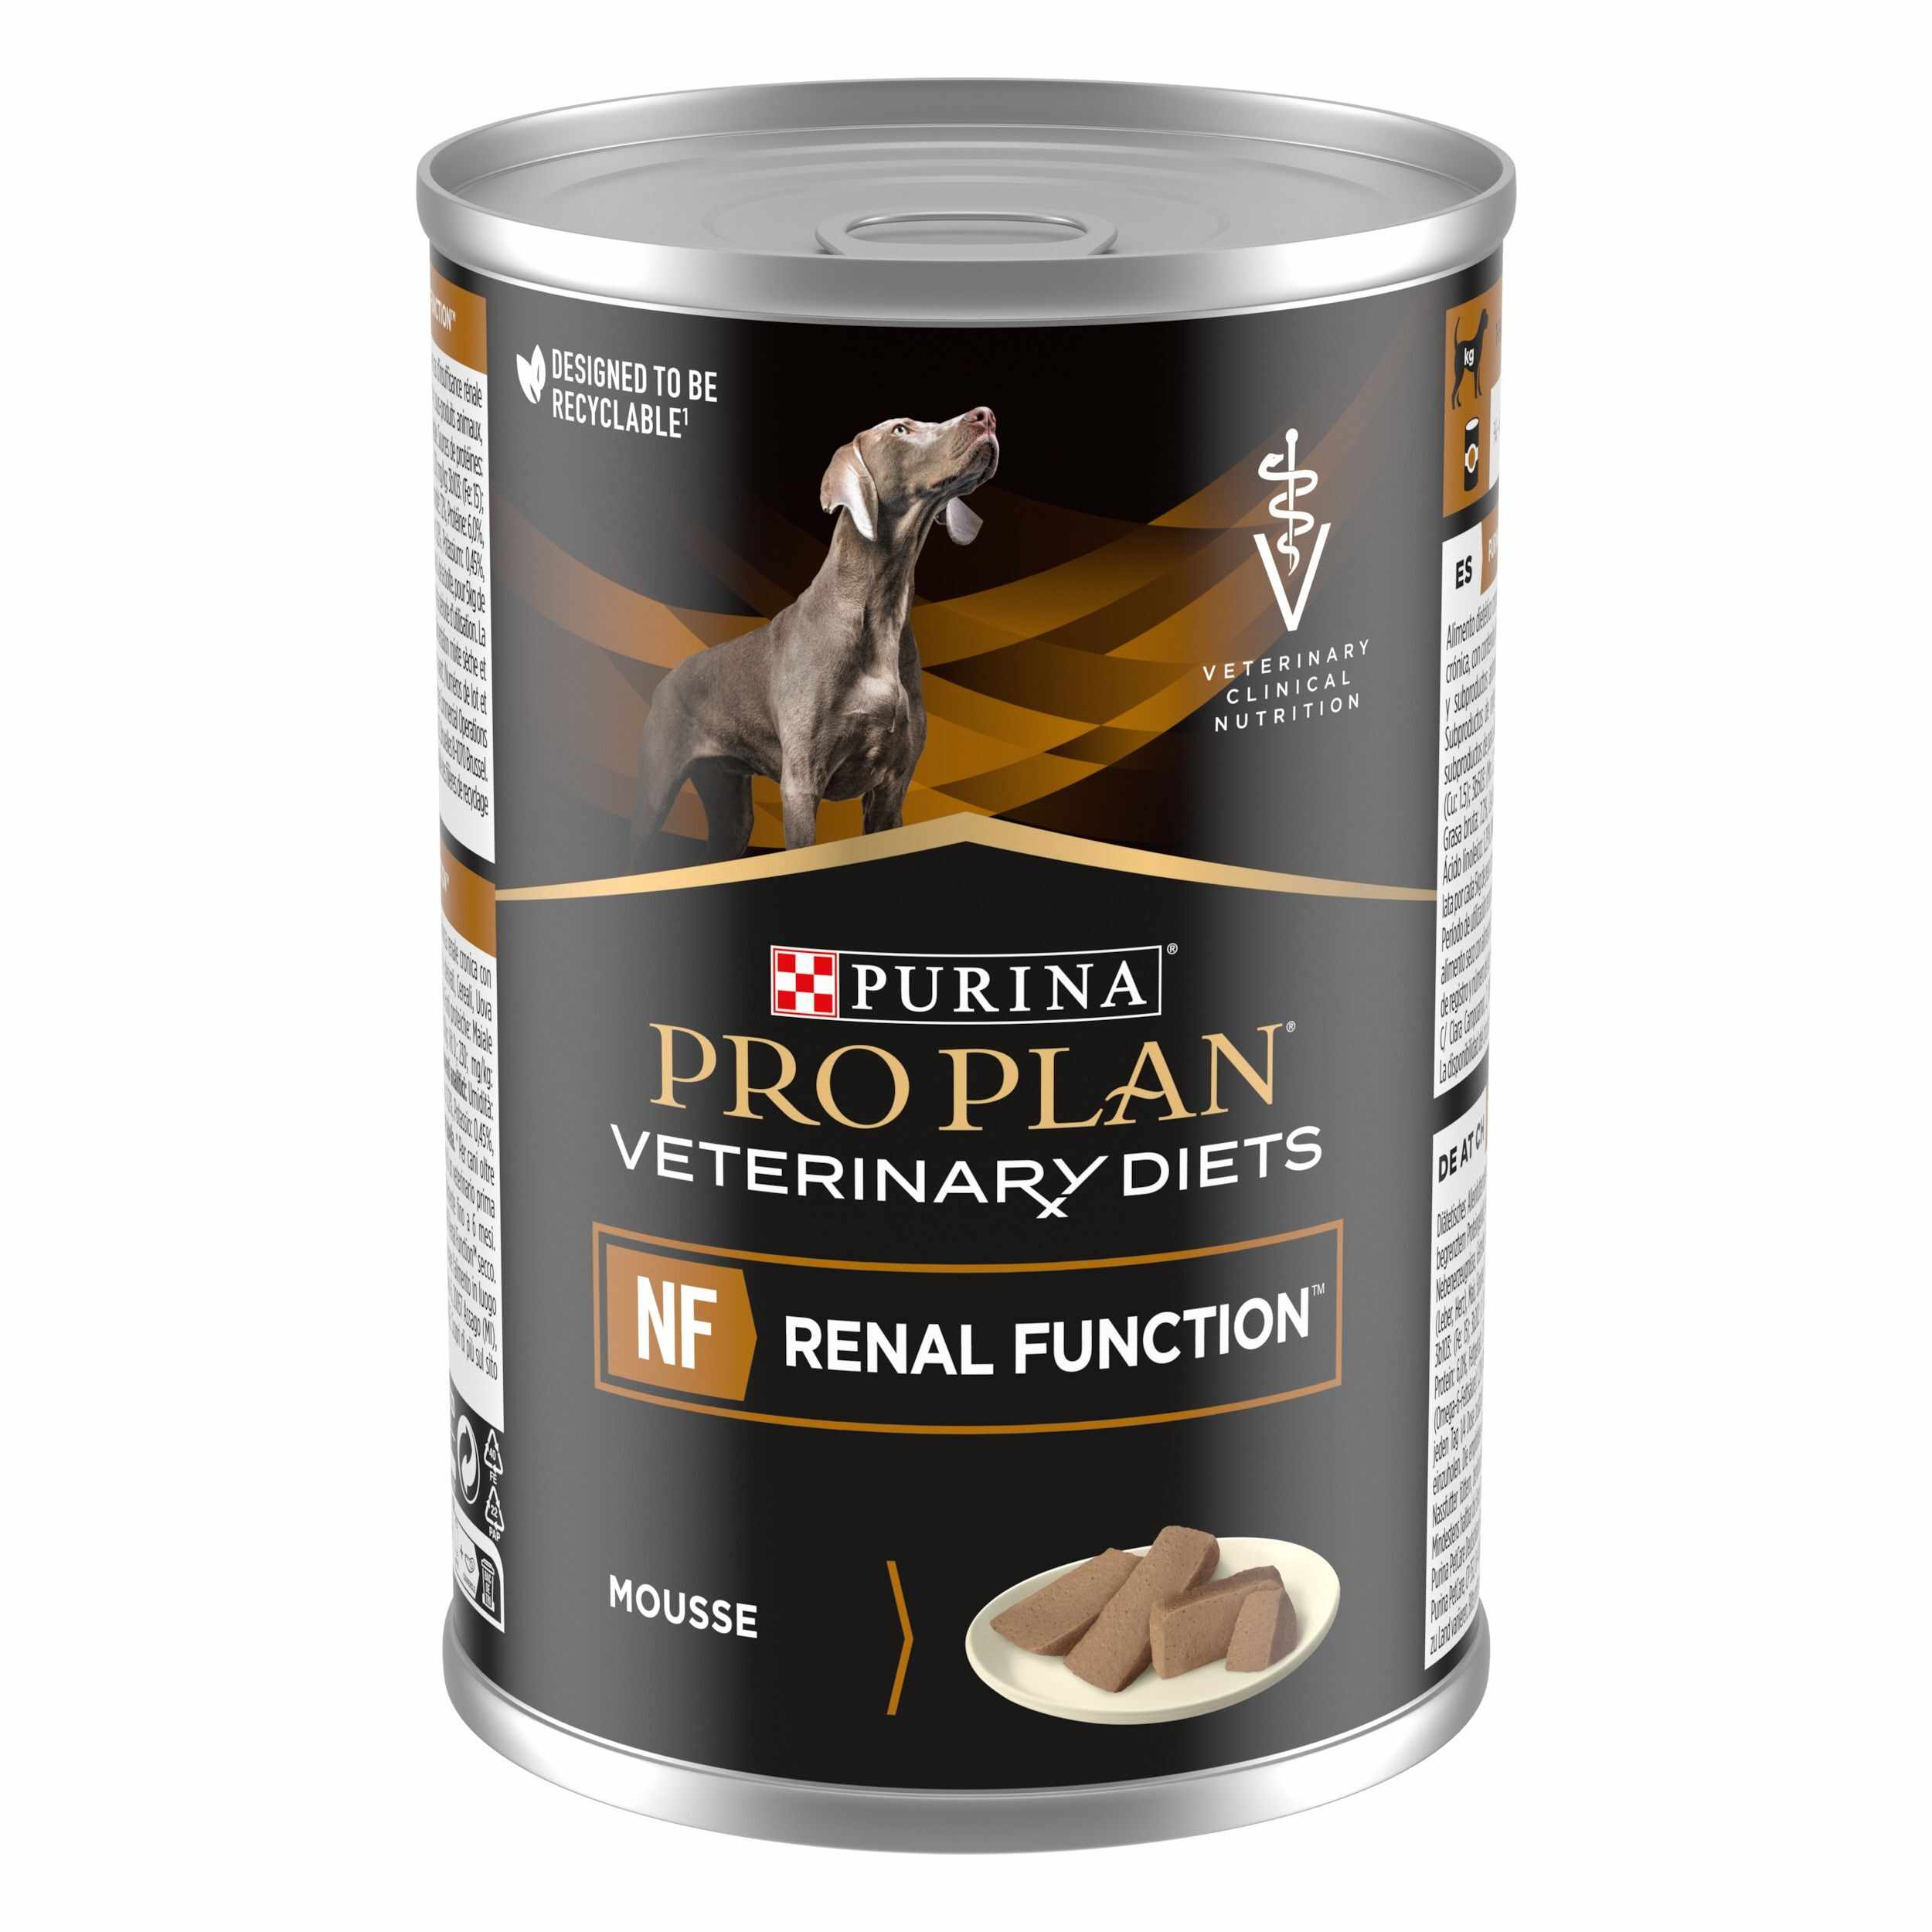 PURINA PRO PLAN VETERINARY DIETS NF Renal Function Mousse, 400 g